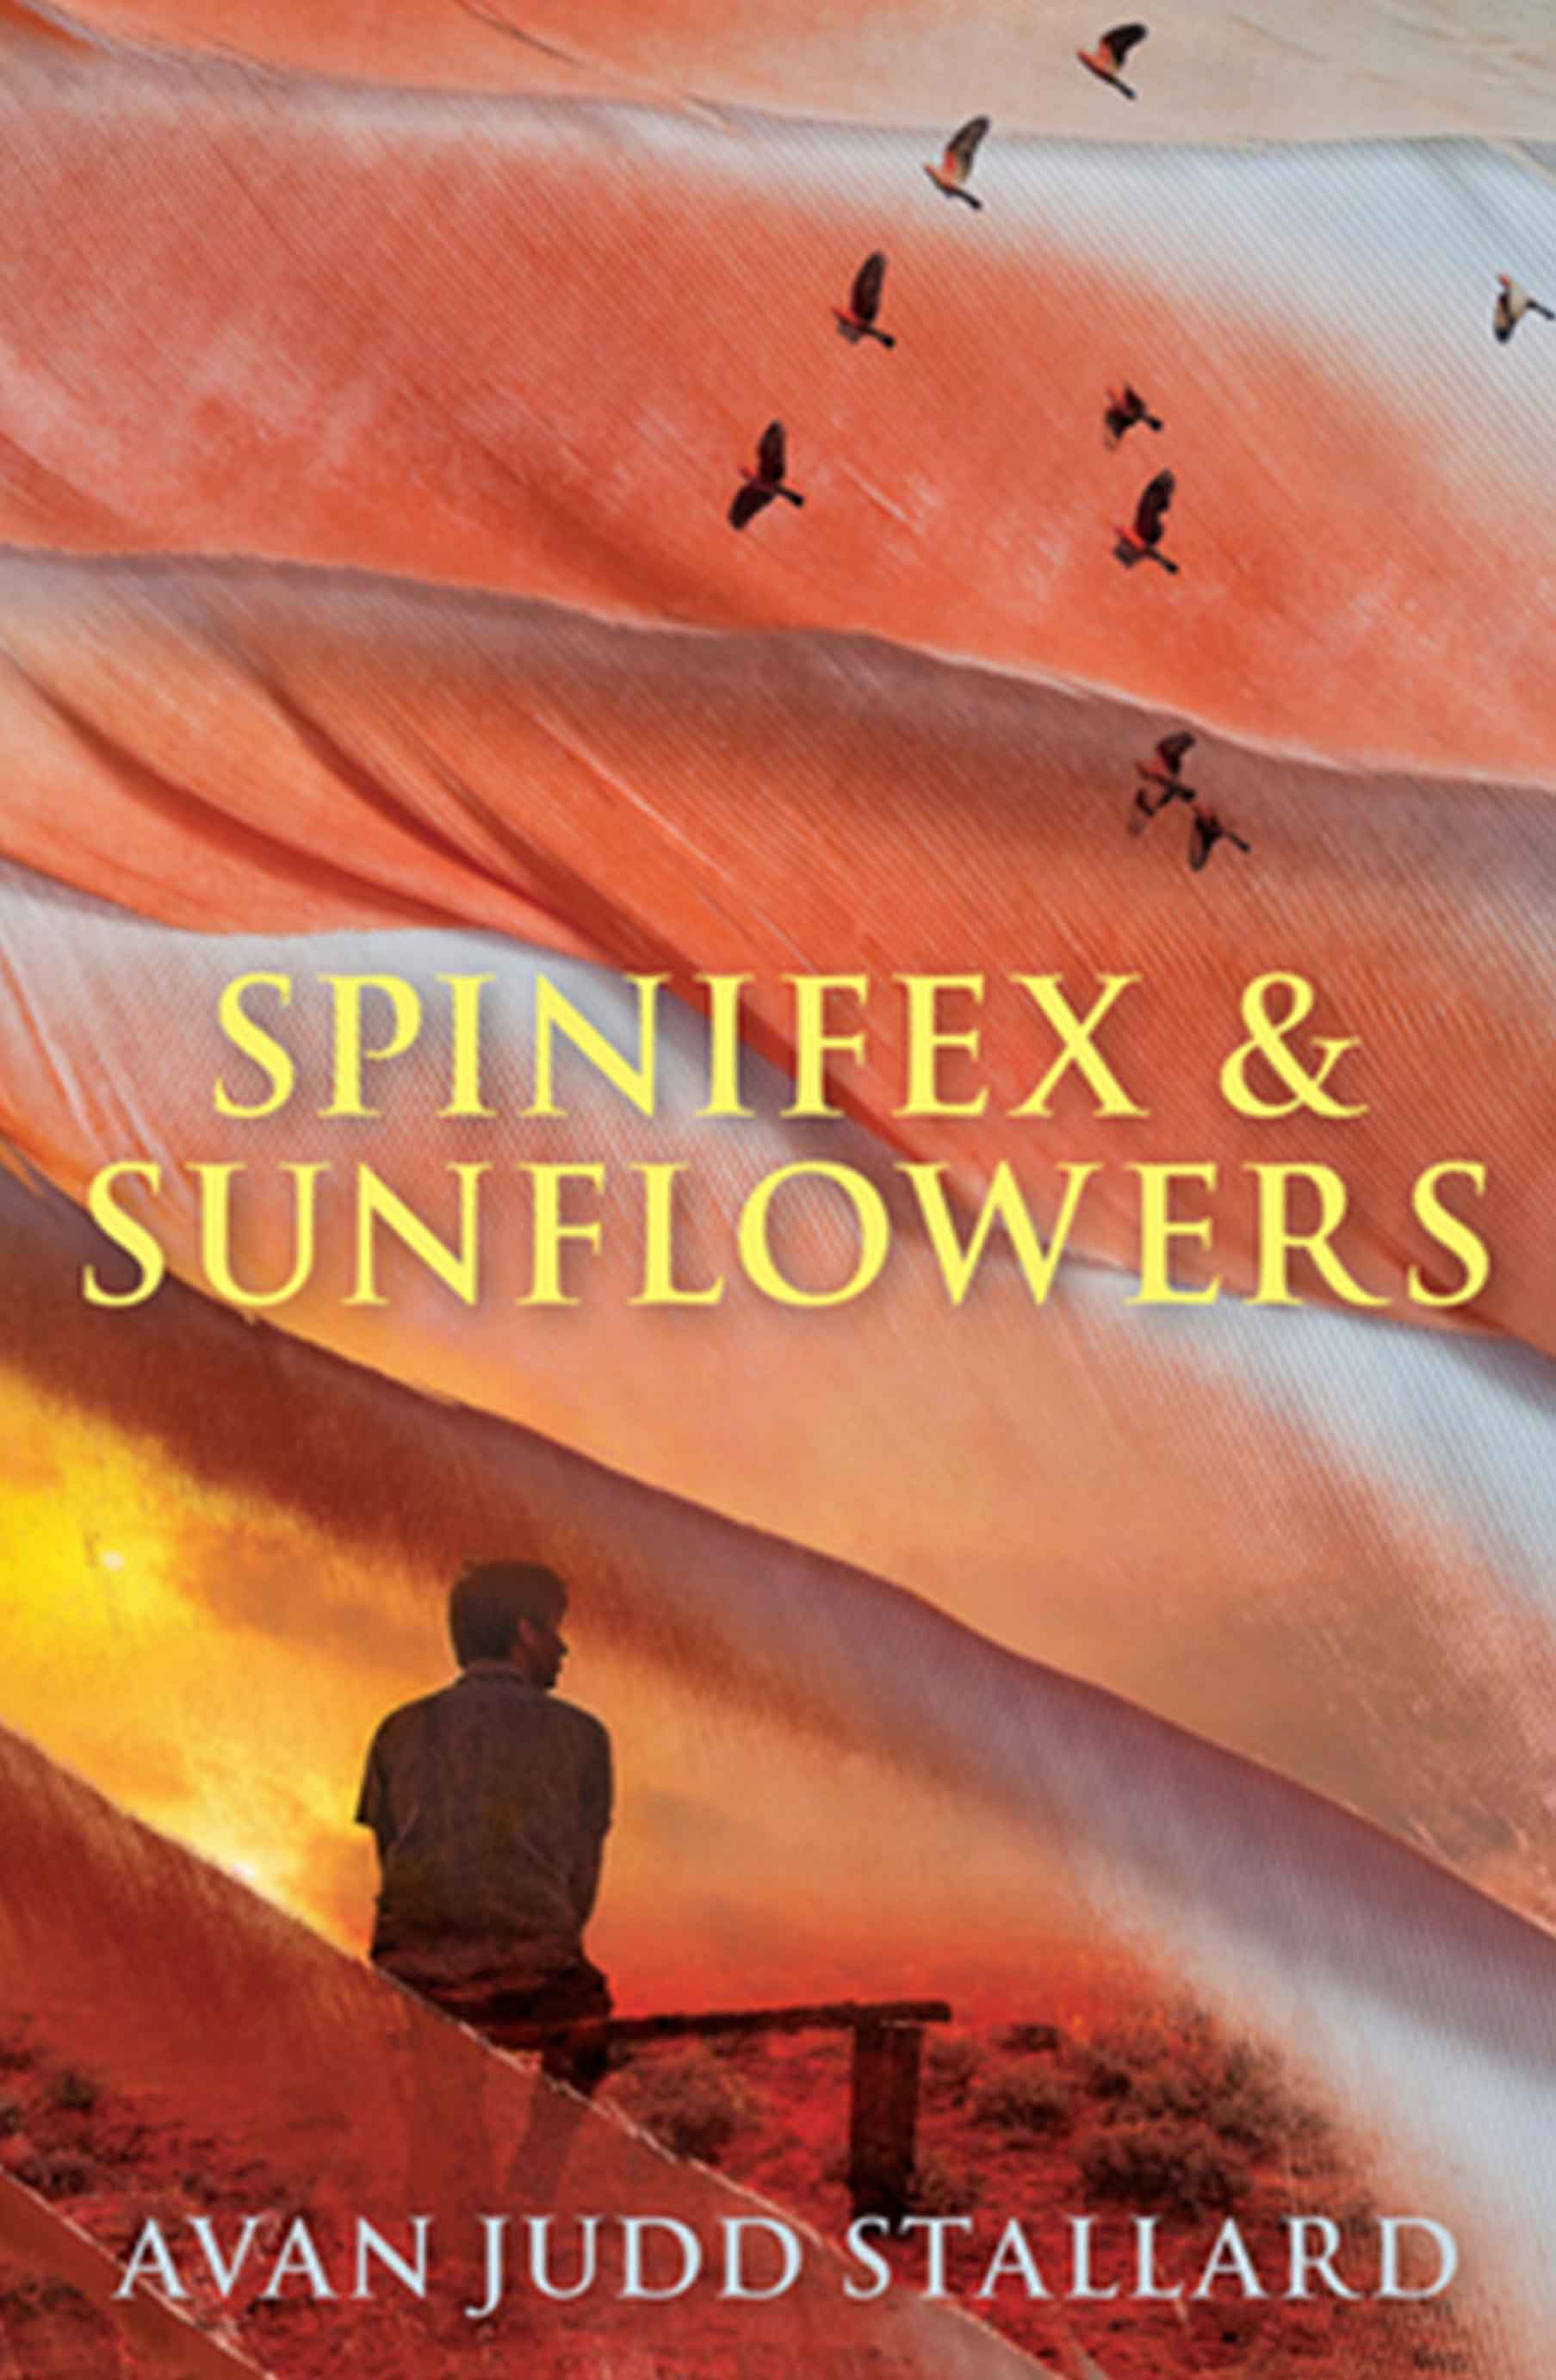 Spinifex & Sunflowers cover art